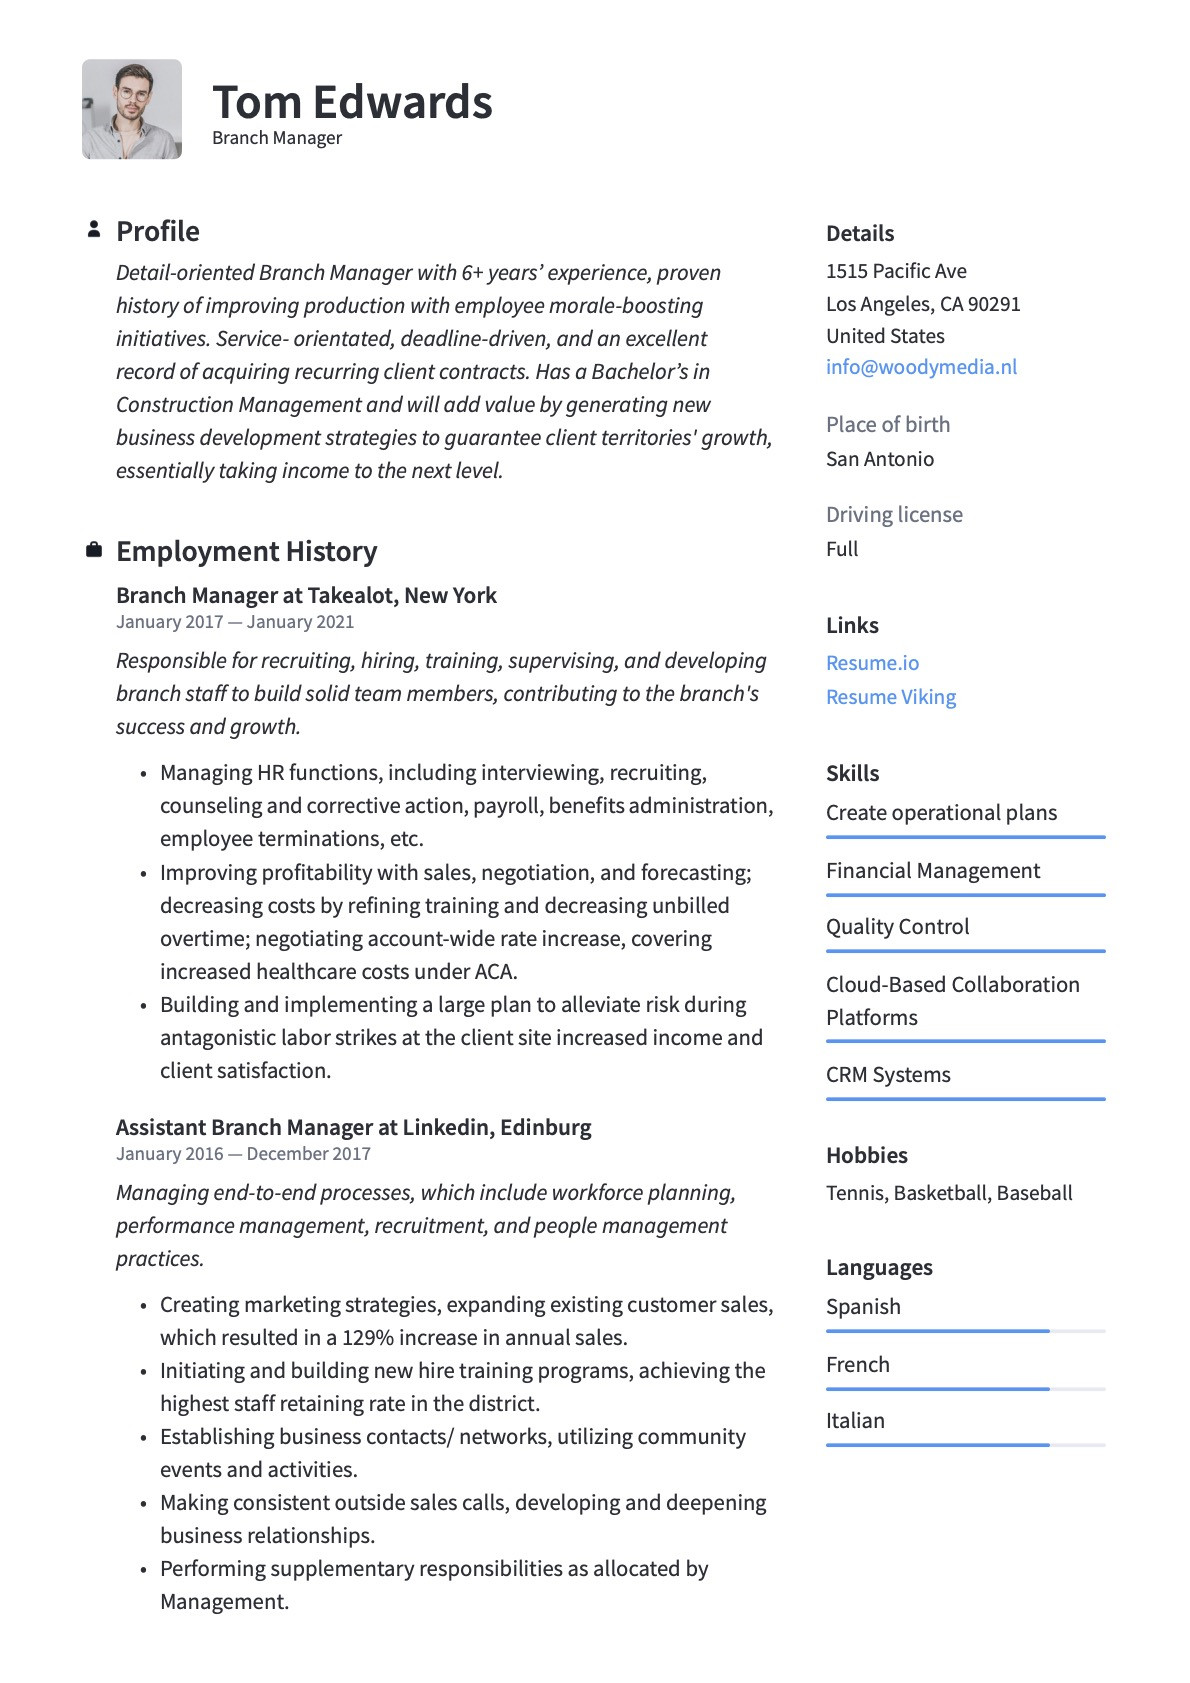 Sample Resume for Construction Branch Coordinagtor Branch Manager Resume & Guide 20 Templates 2022